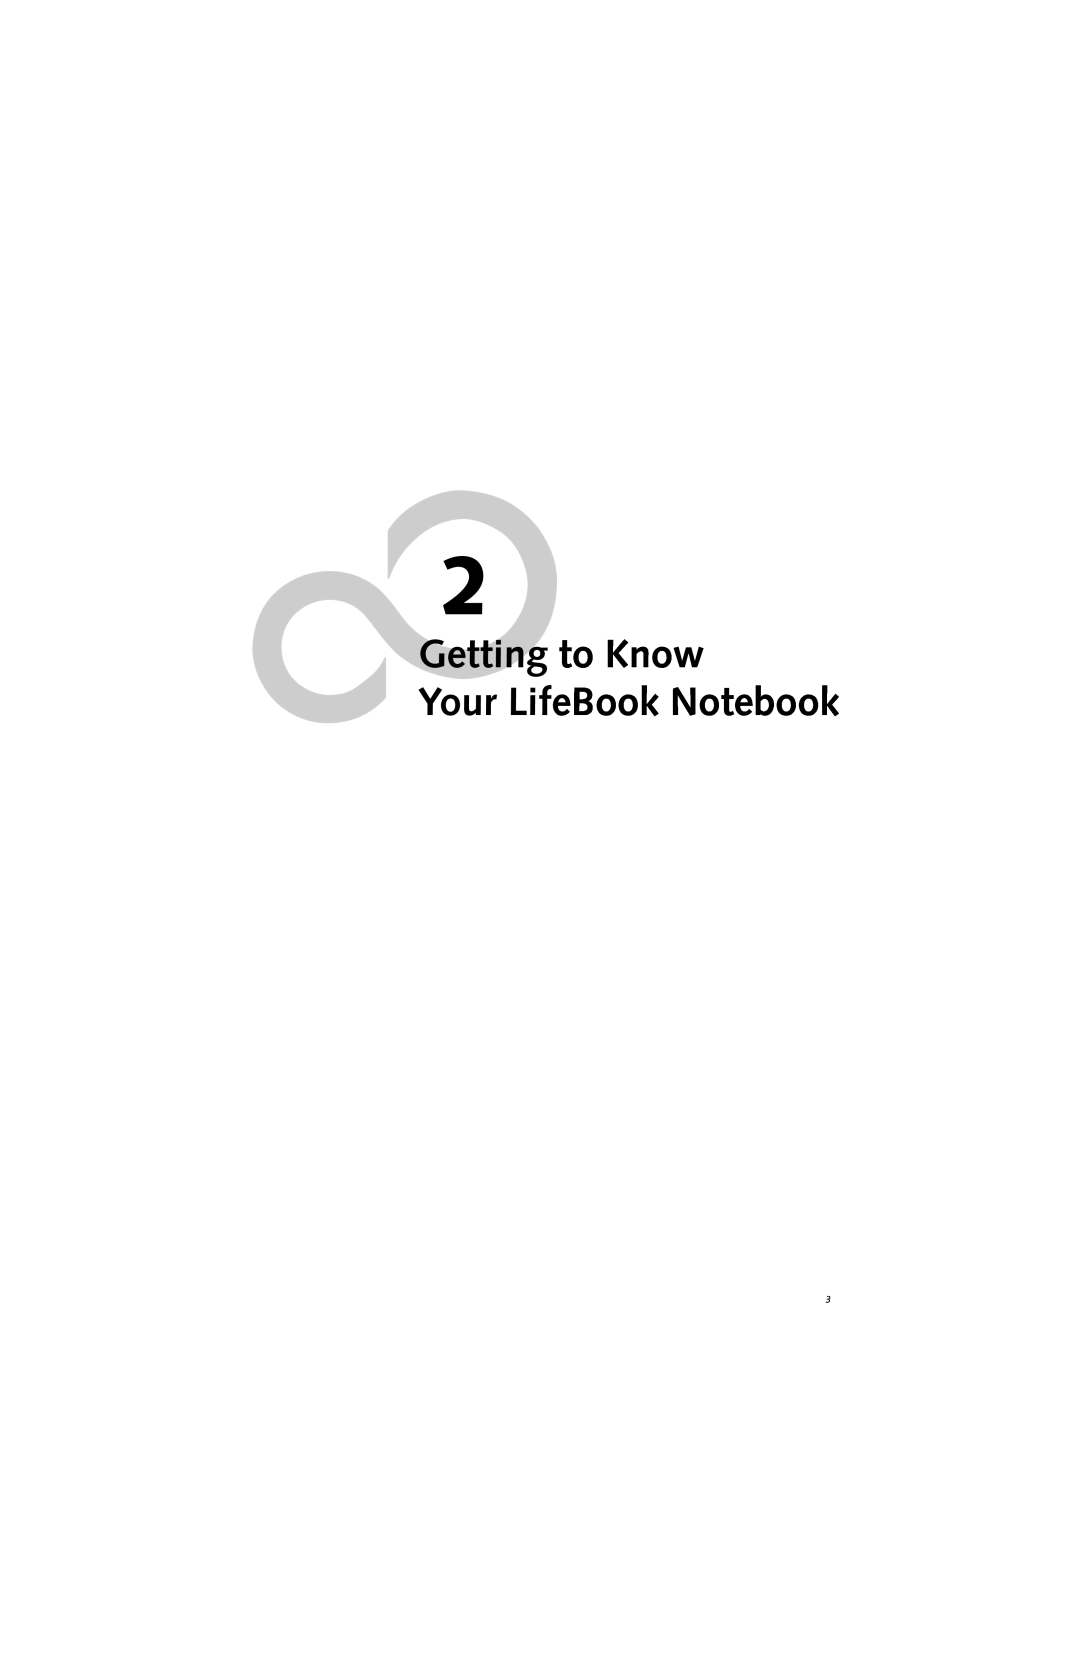 Fujitsu E8310 manual Getting to Know, Your LifeBook Notebook 